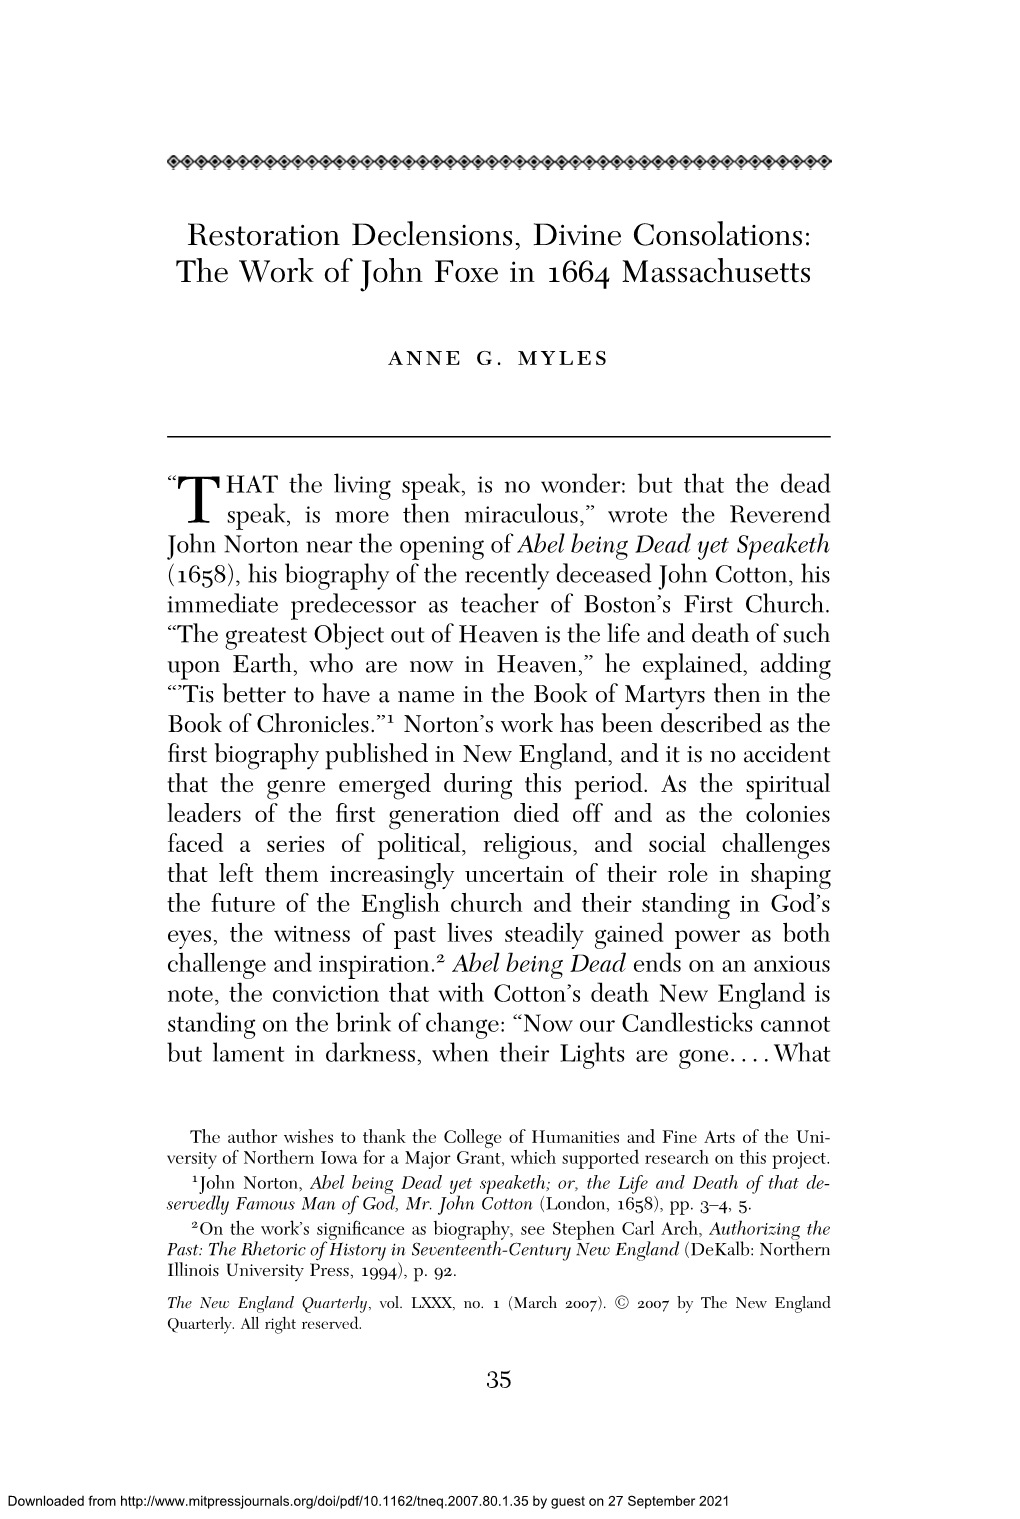 Restoration Declensions, Divine Consolations: the Work of John Foxe in 1664 Massachusetts